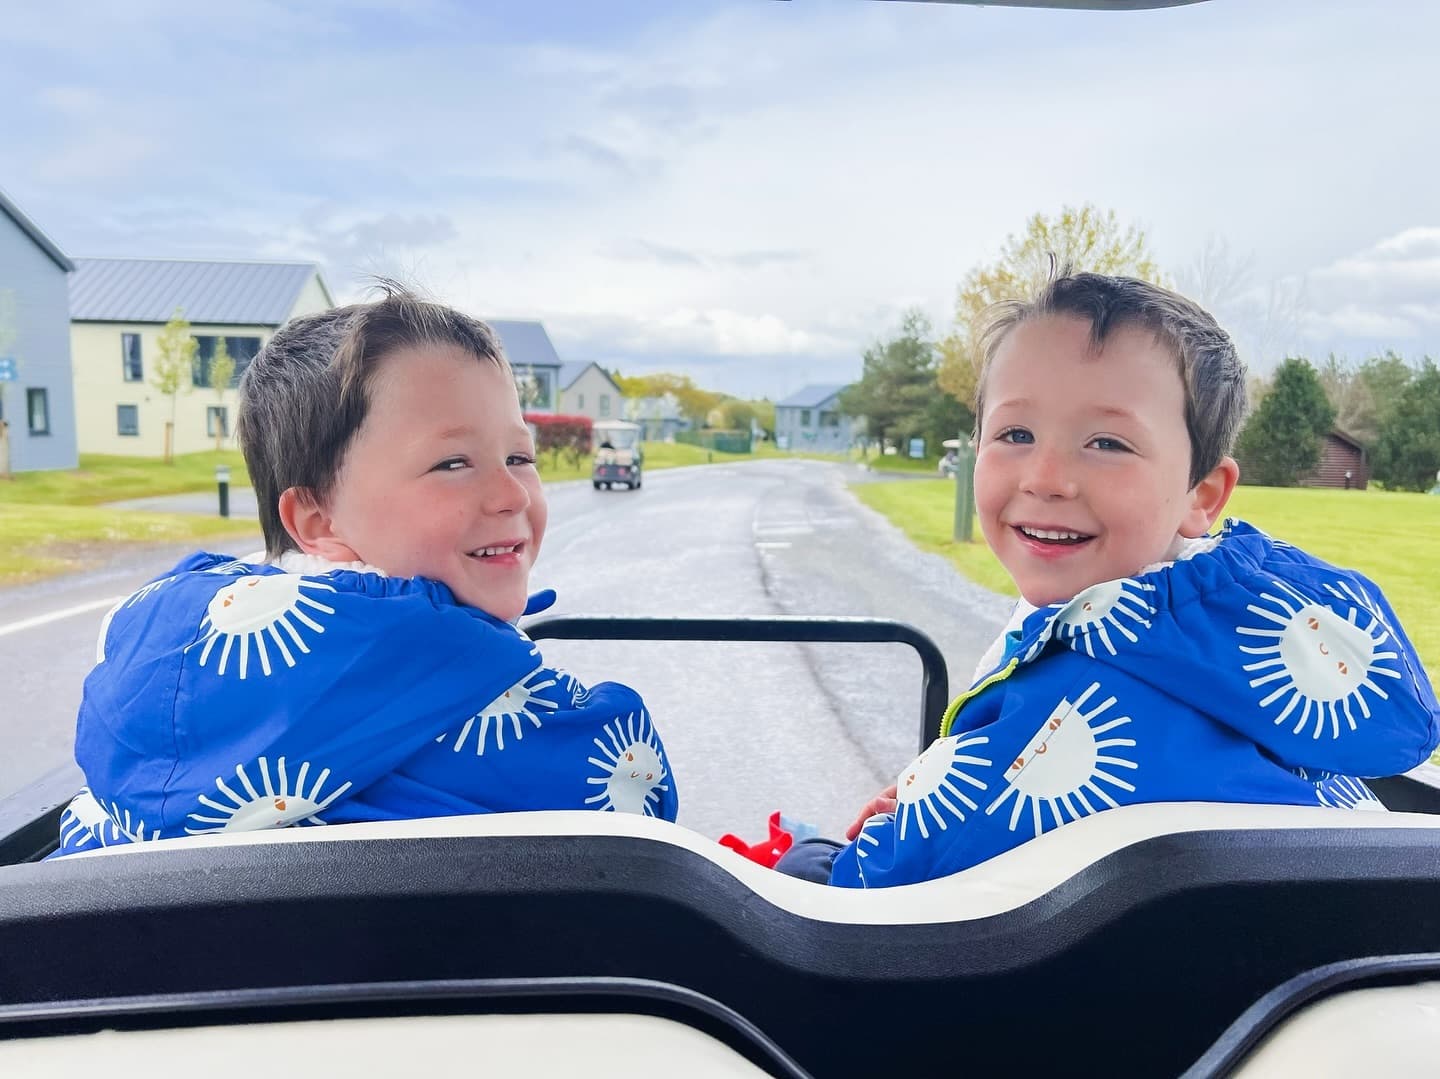 Backseat drivers! 🤭🛺🗺️

📸 Don’t forget to share your memories with us. Use the hashtag #MyBluestoneBreak and tag us @bluestonewales for your chance to be featured. ✨

(📷: triplets_and_megan)